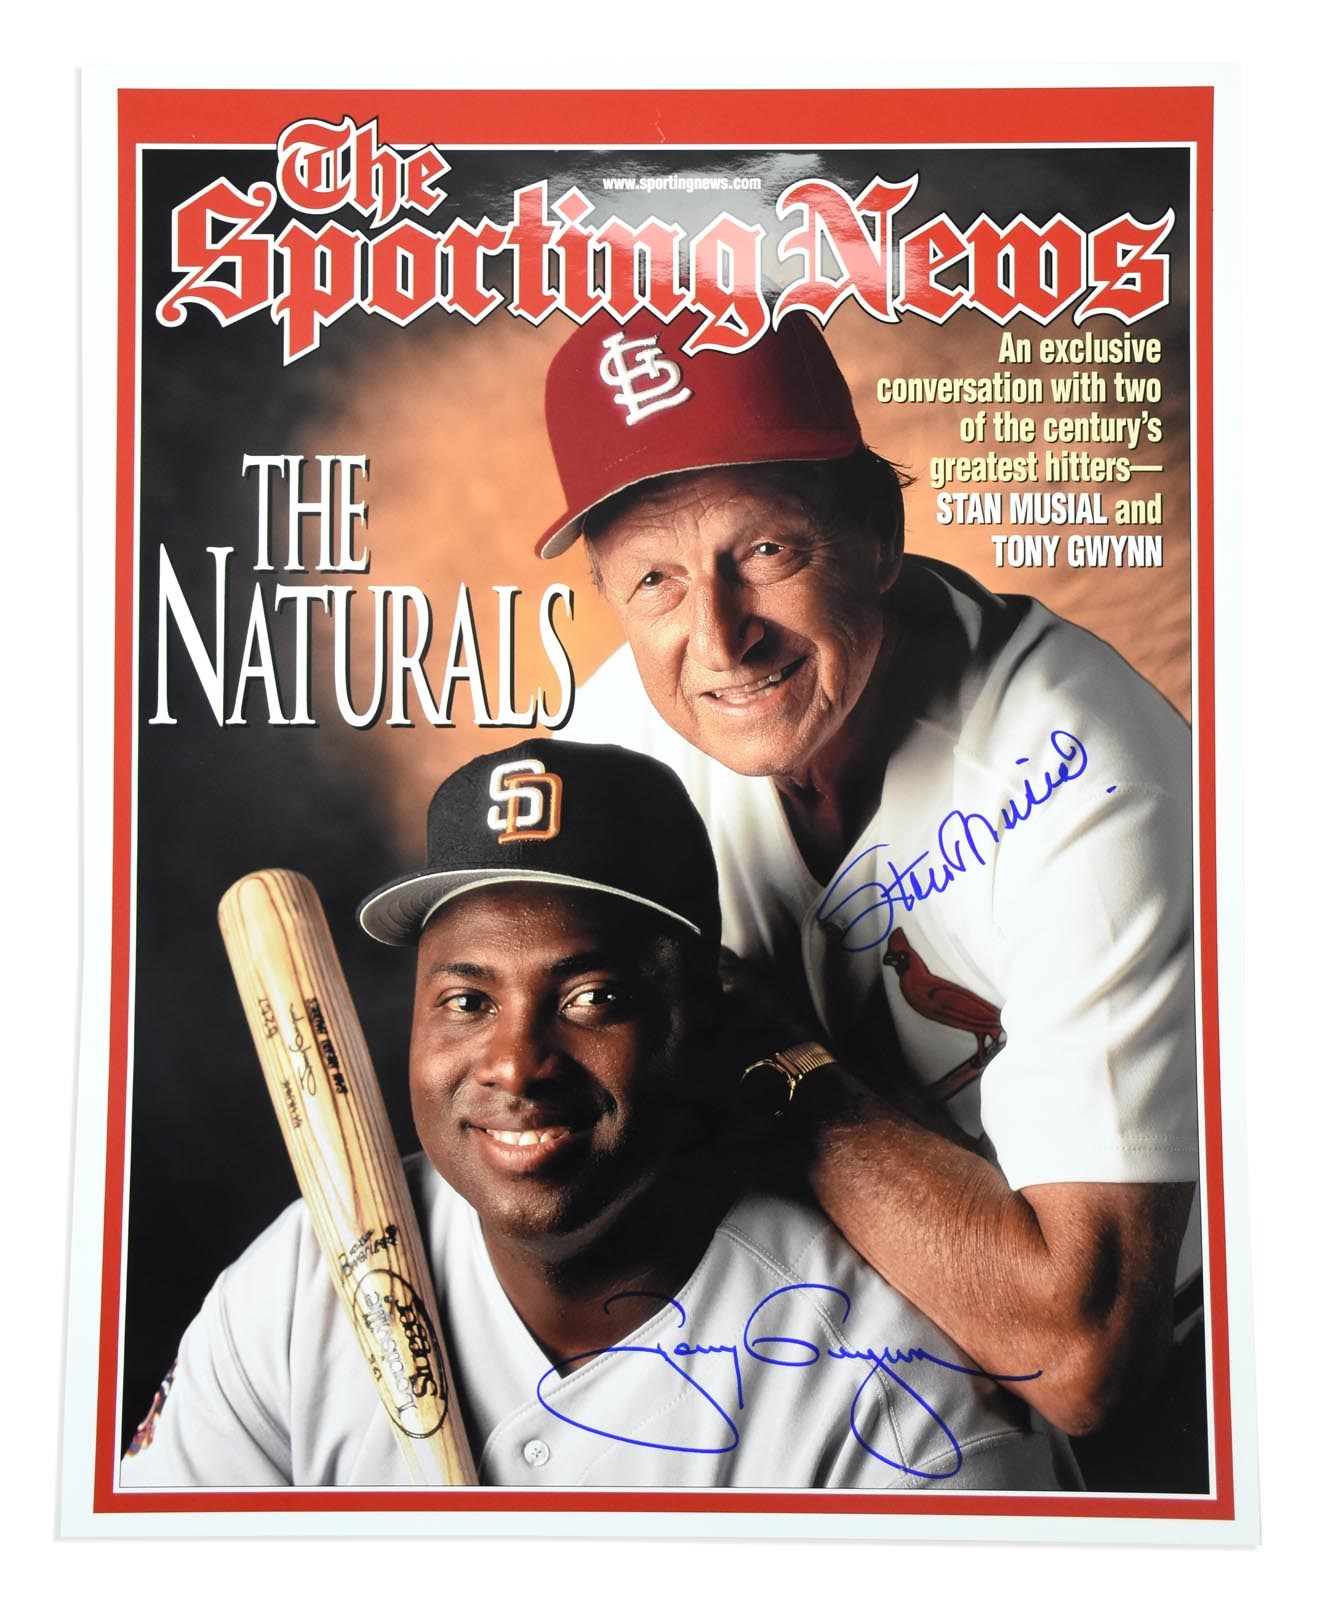 Baseball Autographs - Tony Gwynn & Stan Musial Signed "The Naturals" 16 x 20" Photograph